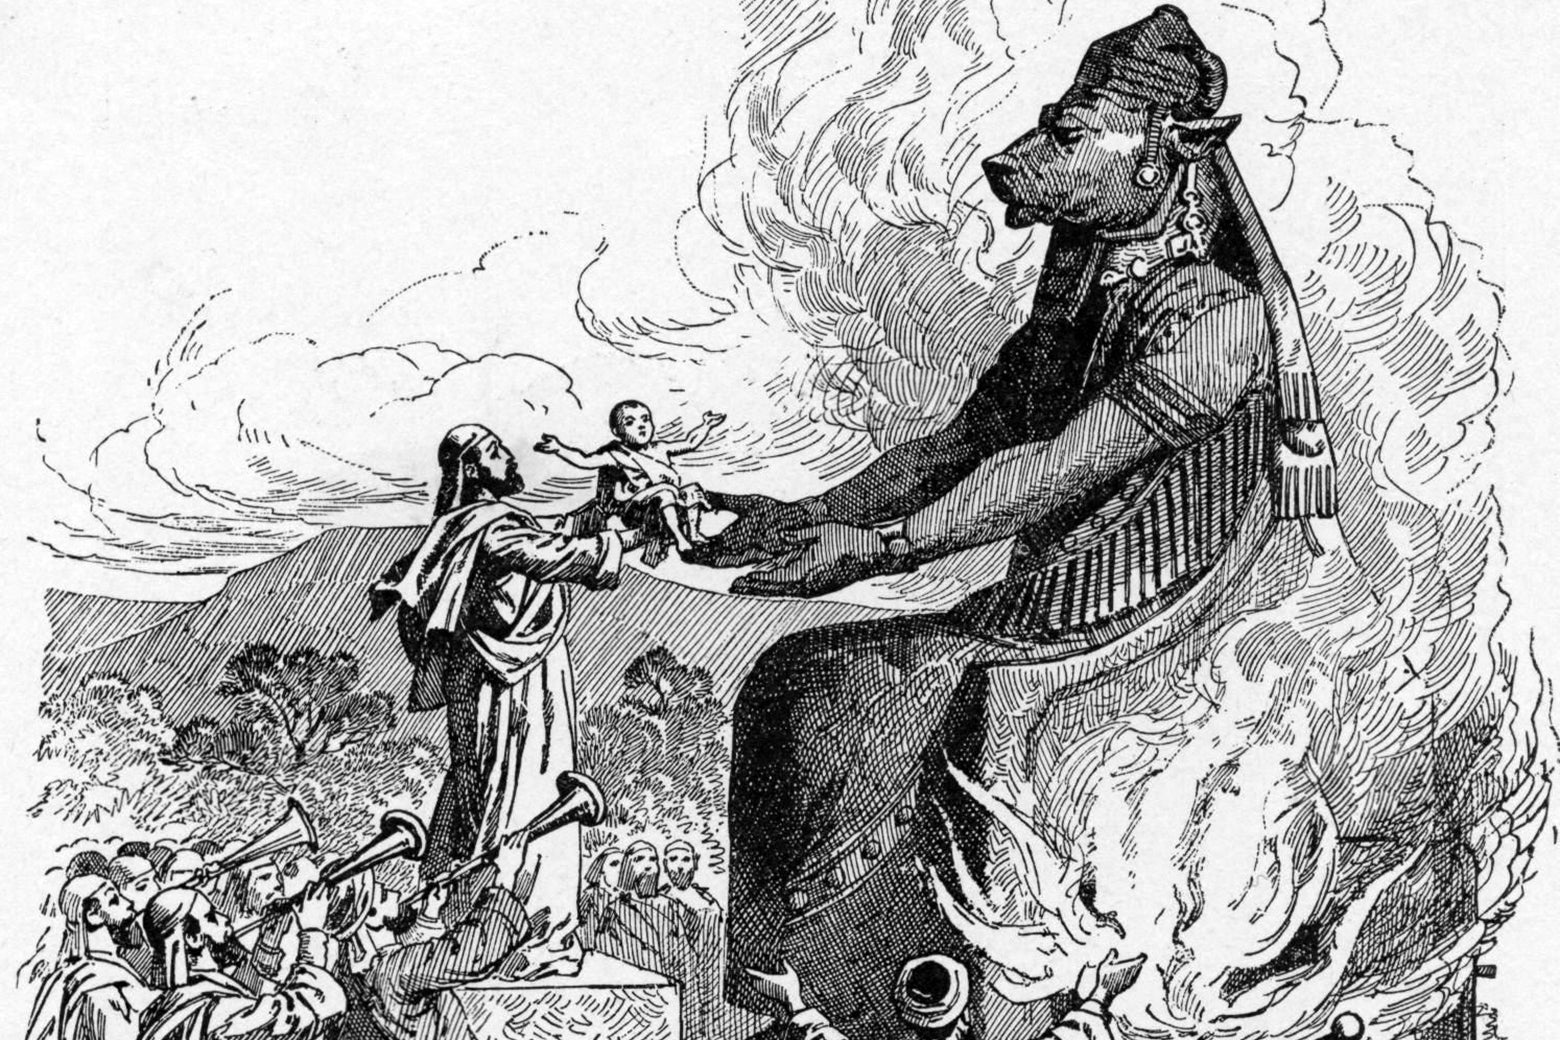 A child is sacrificed to Moloch in a 19th century biblical engraving.